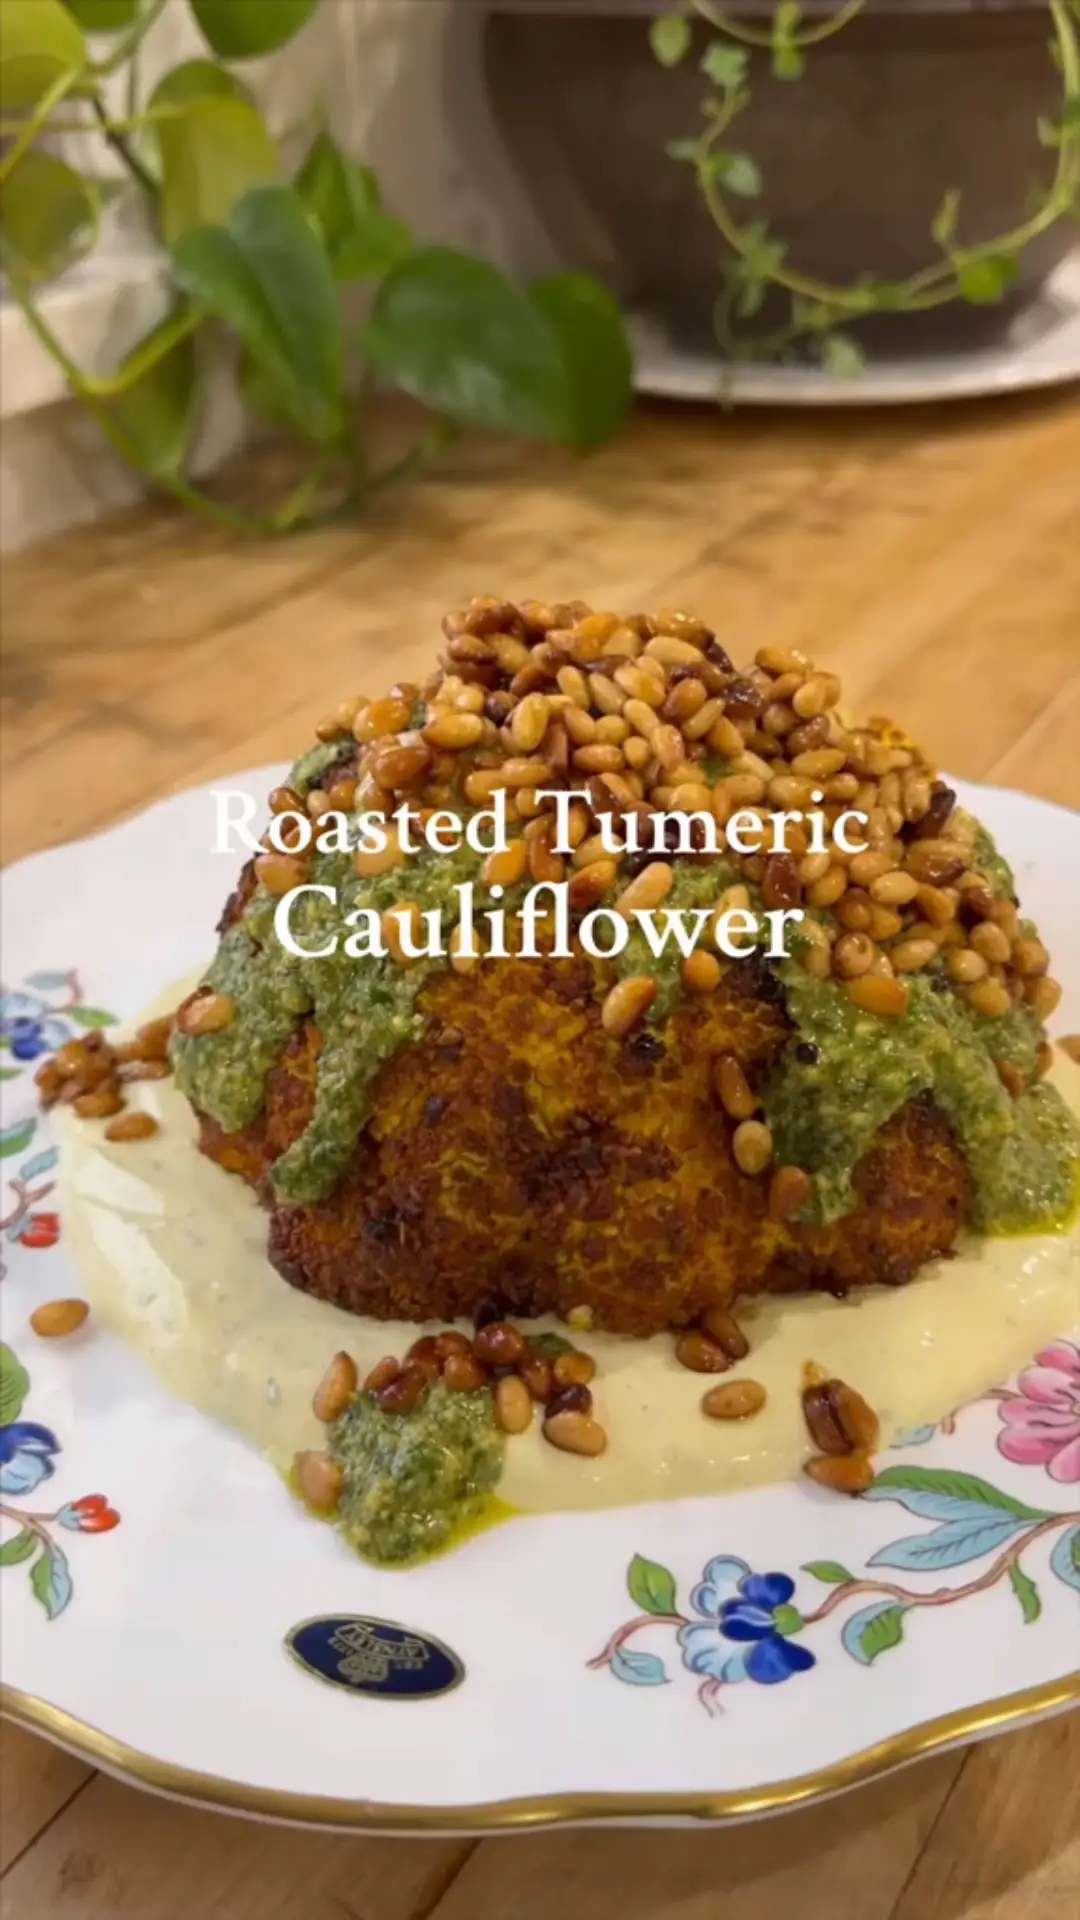 Roasted Turmeric Cauliflower with Herb Dressing an's images